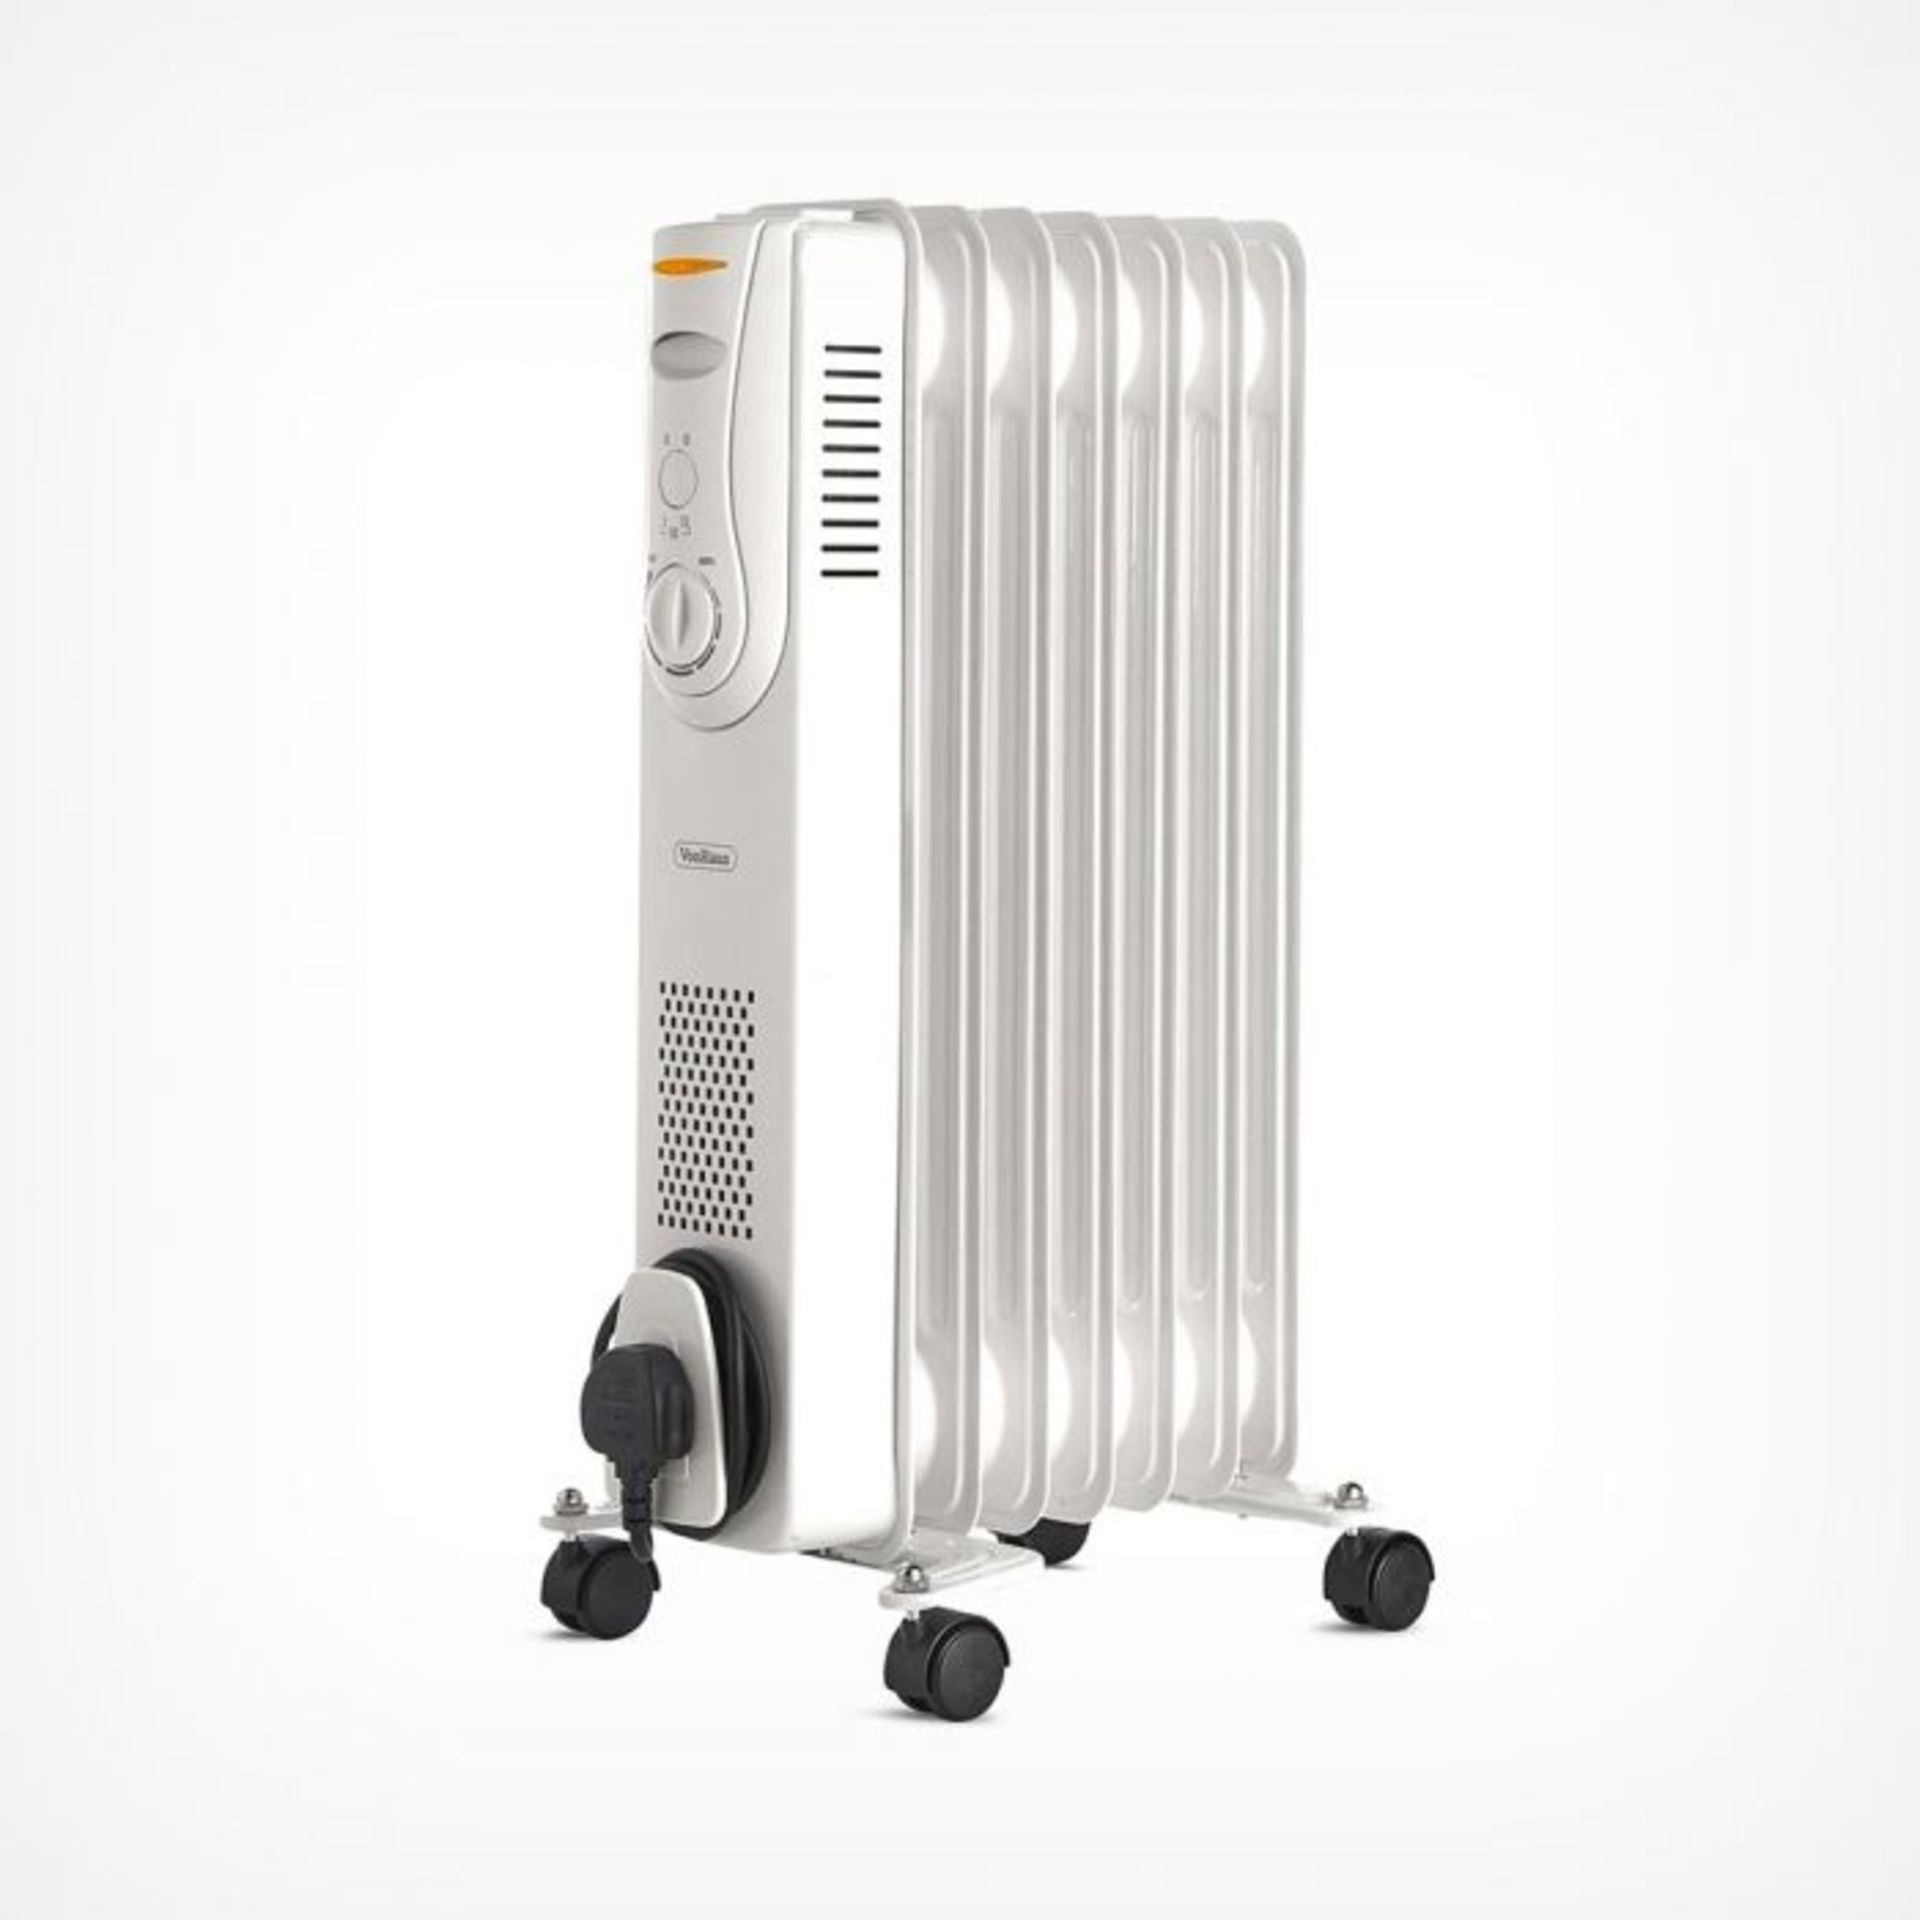 (S426) 7 Fin 1500W Oil Filled Radiator - White Powerful 1500W radiator with 7 oil-filled fins ... - Image 2 of 3